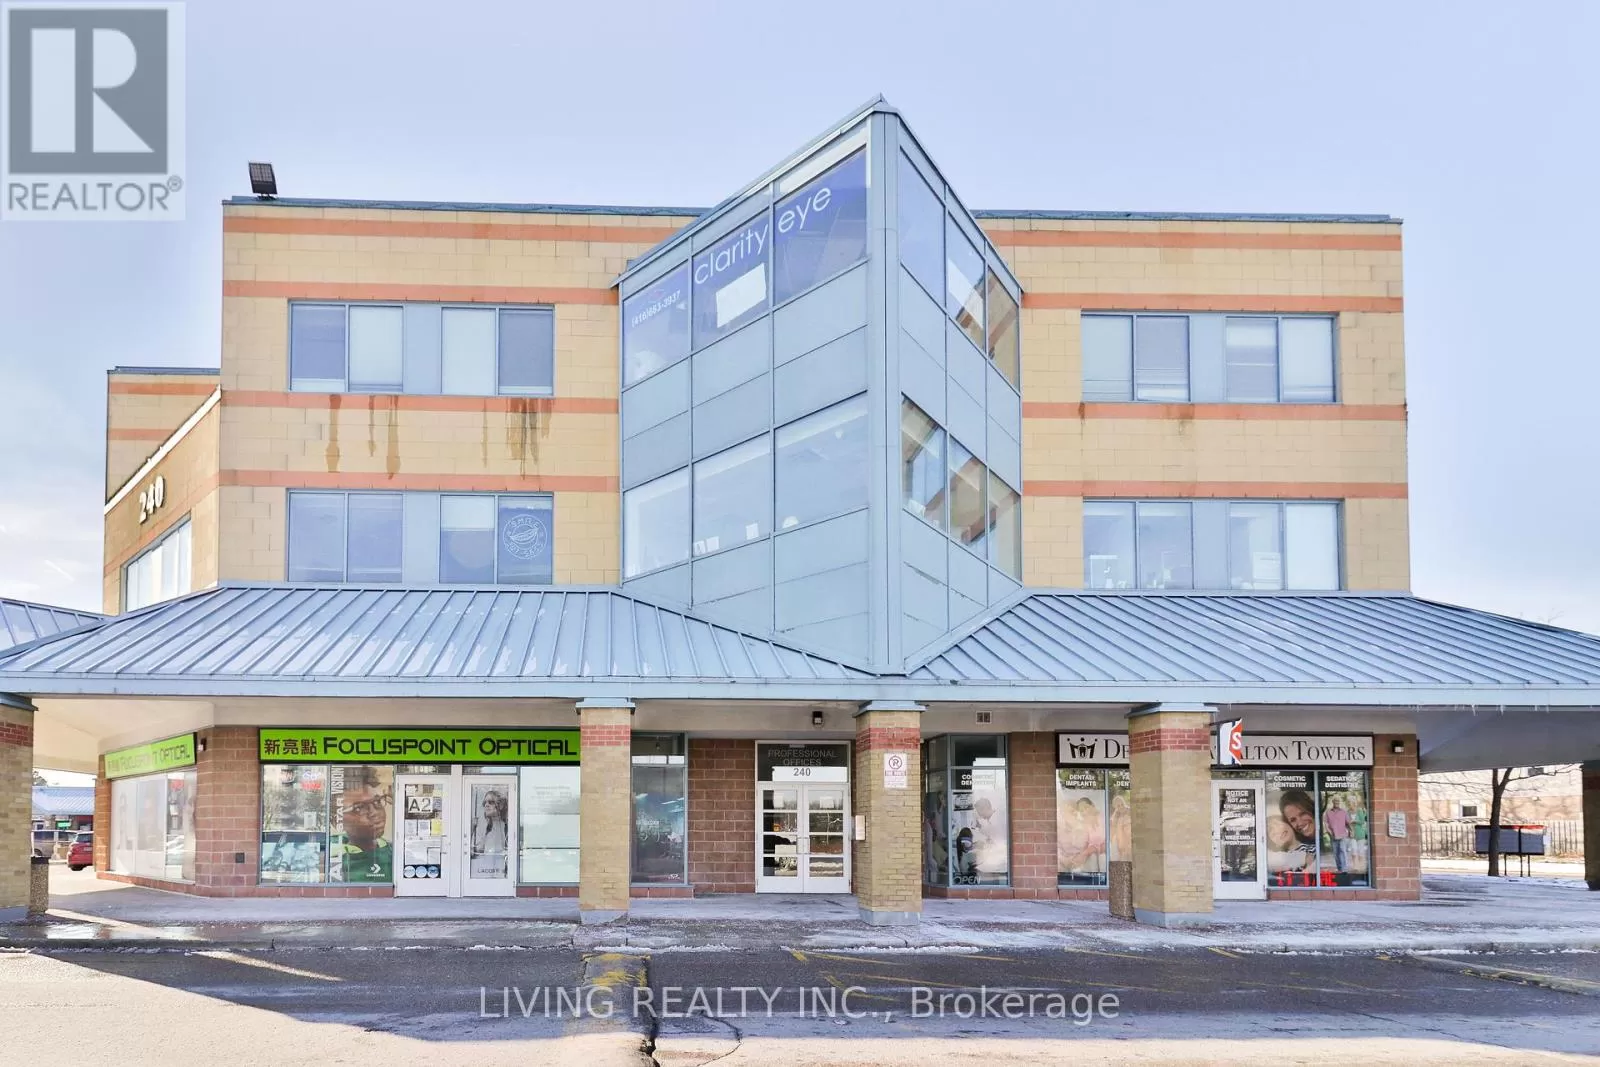 Offices for rent: 200a - 240 Alton Towers Circle, Toronto, Ontario M1V 3Z3